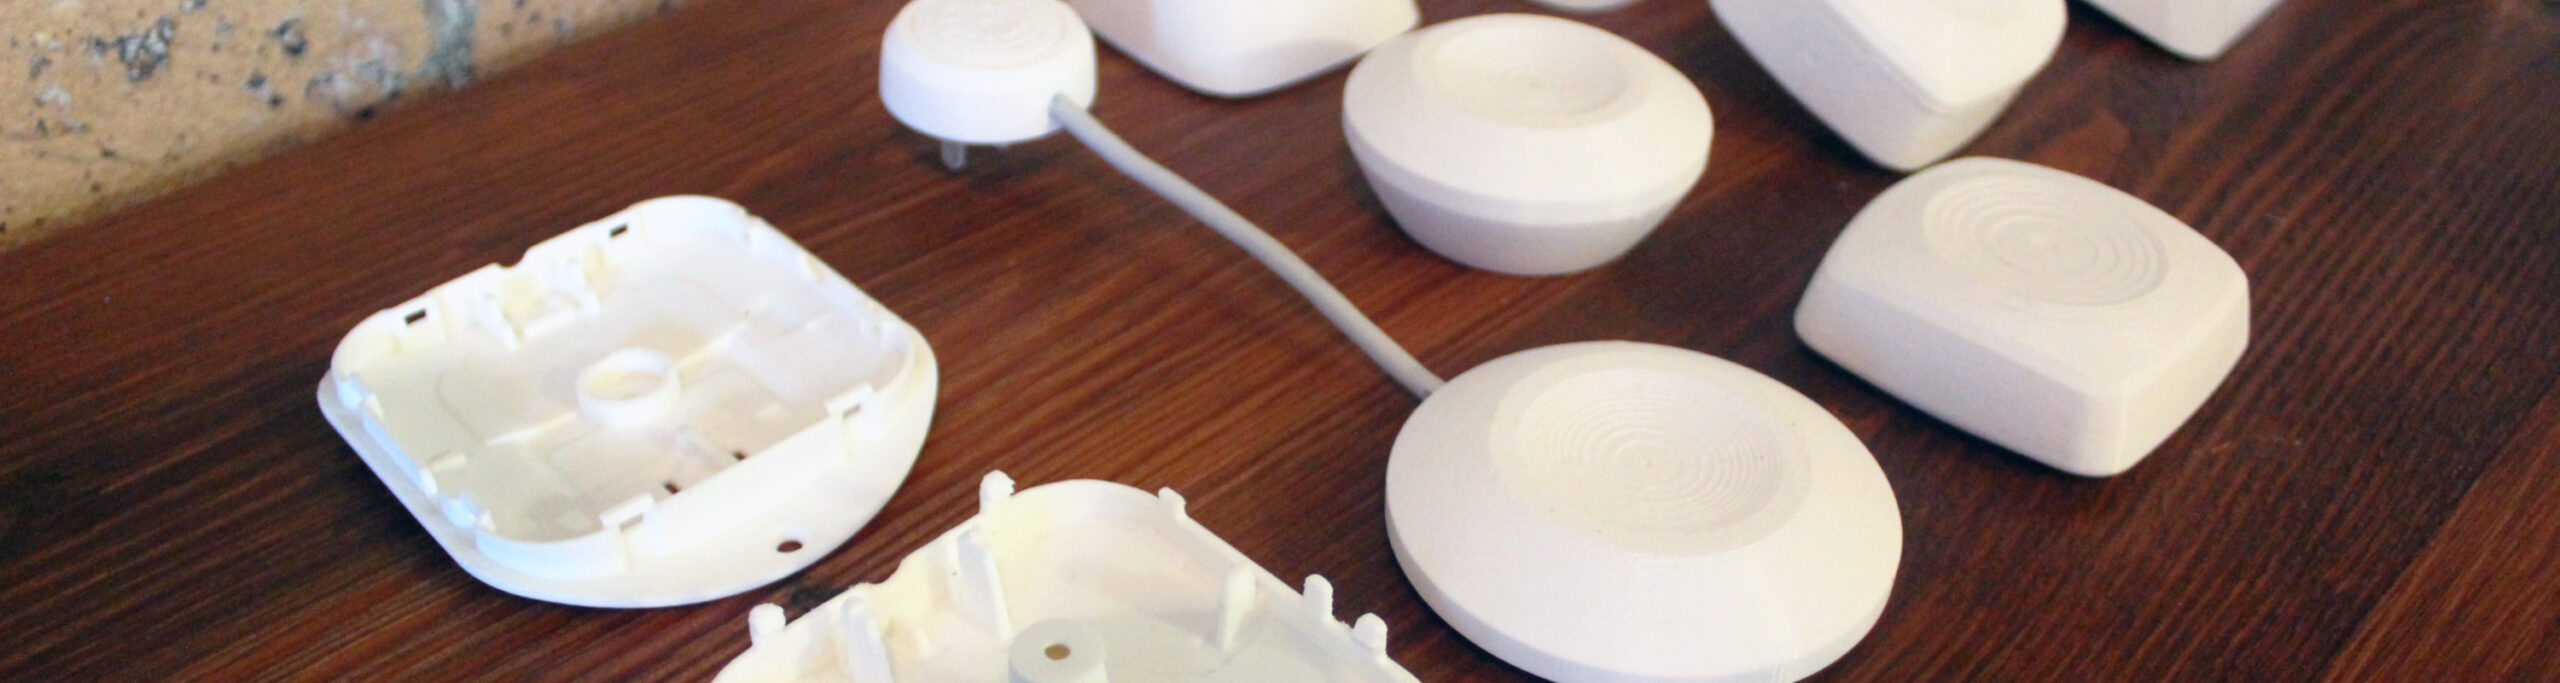 3D printing prototypes to save money and minimize risk 1